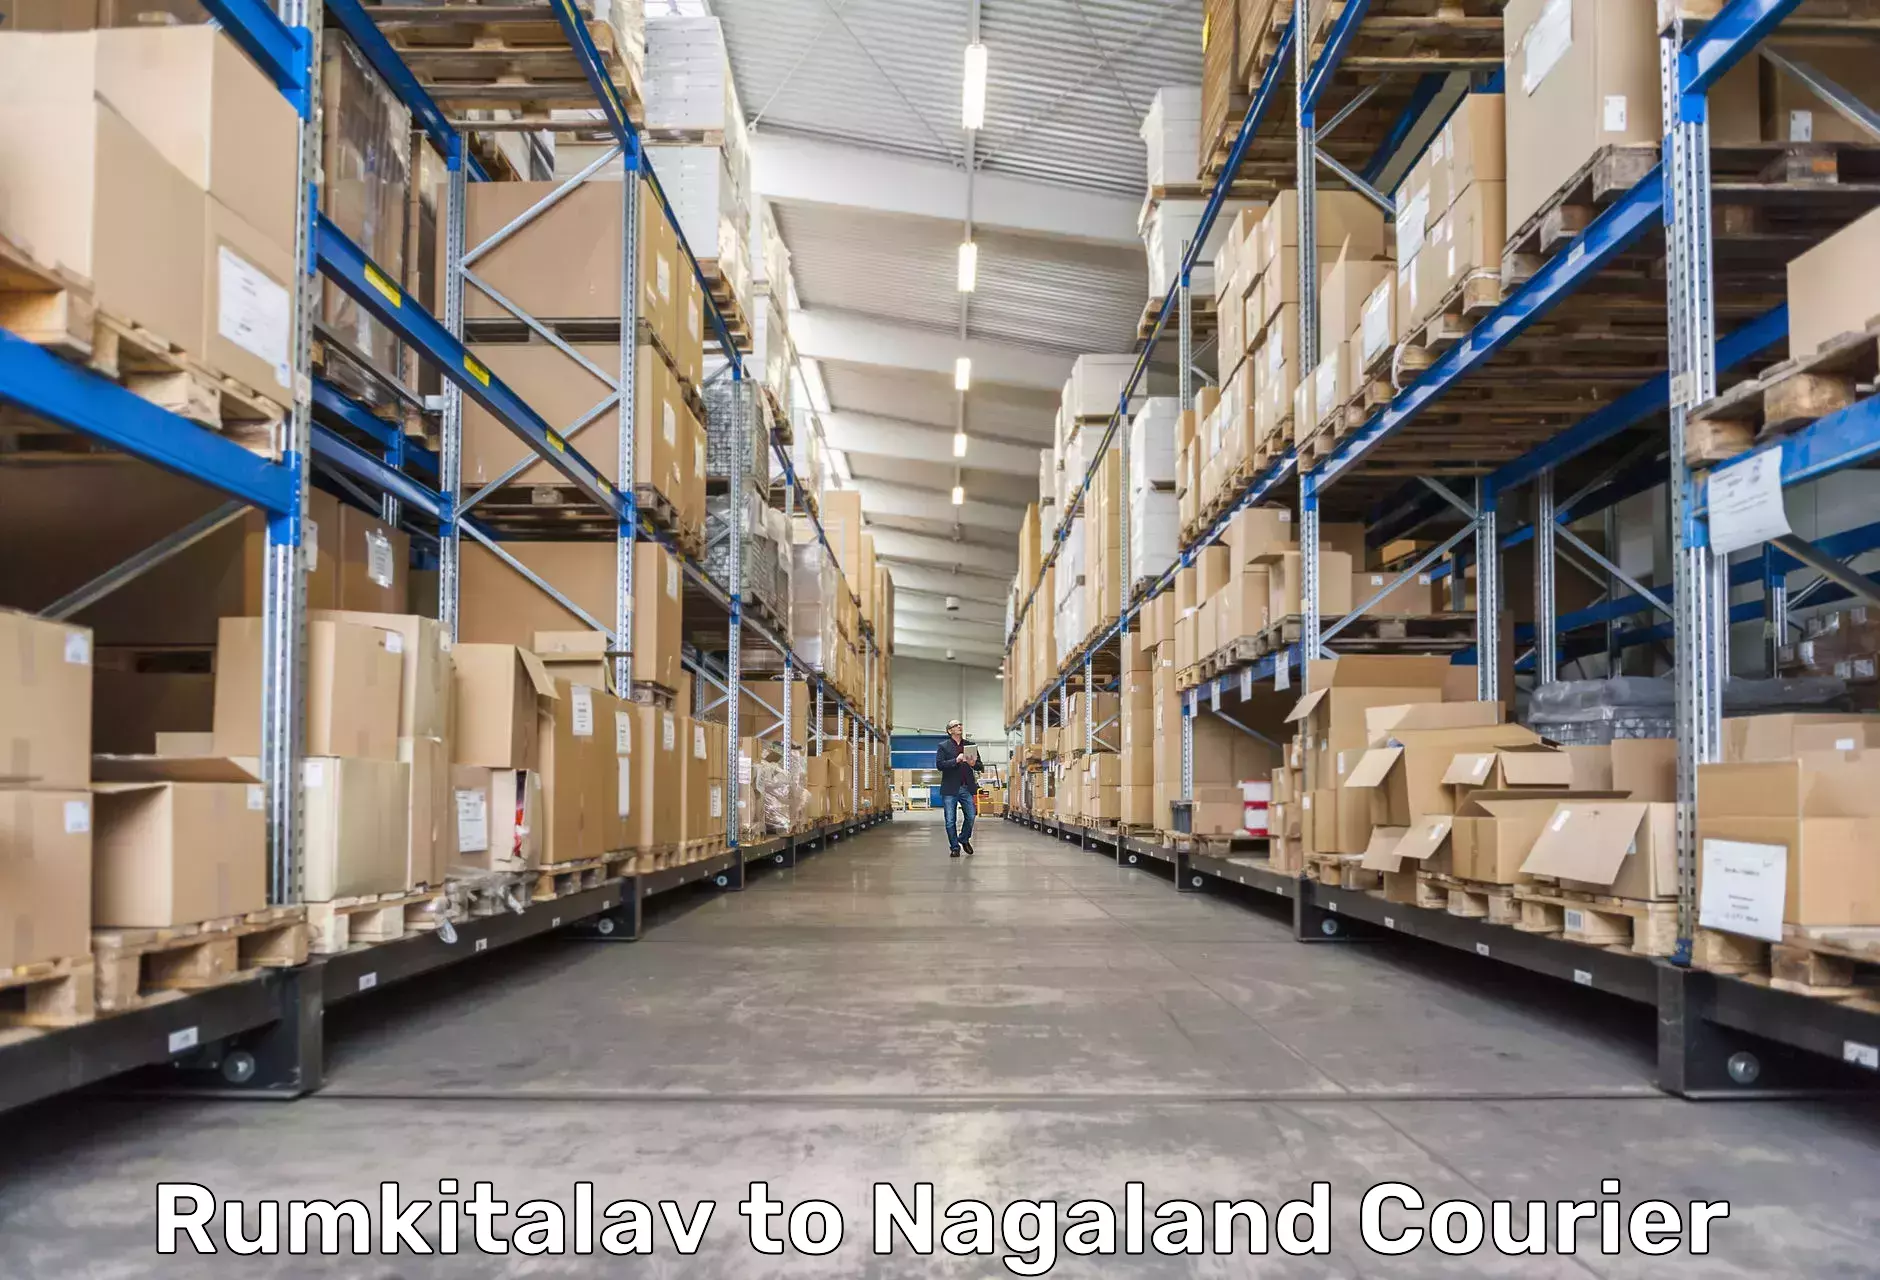 State-of-the-art courier technology Rumkitalav to Nagaland